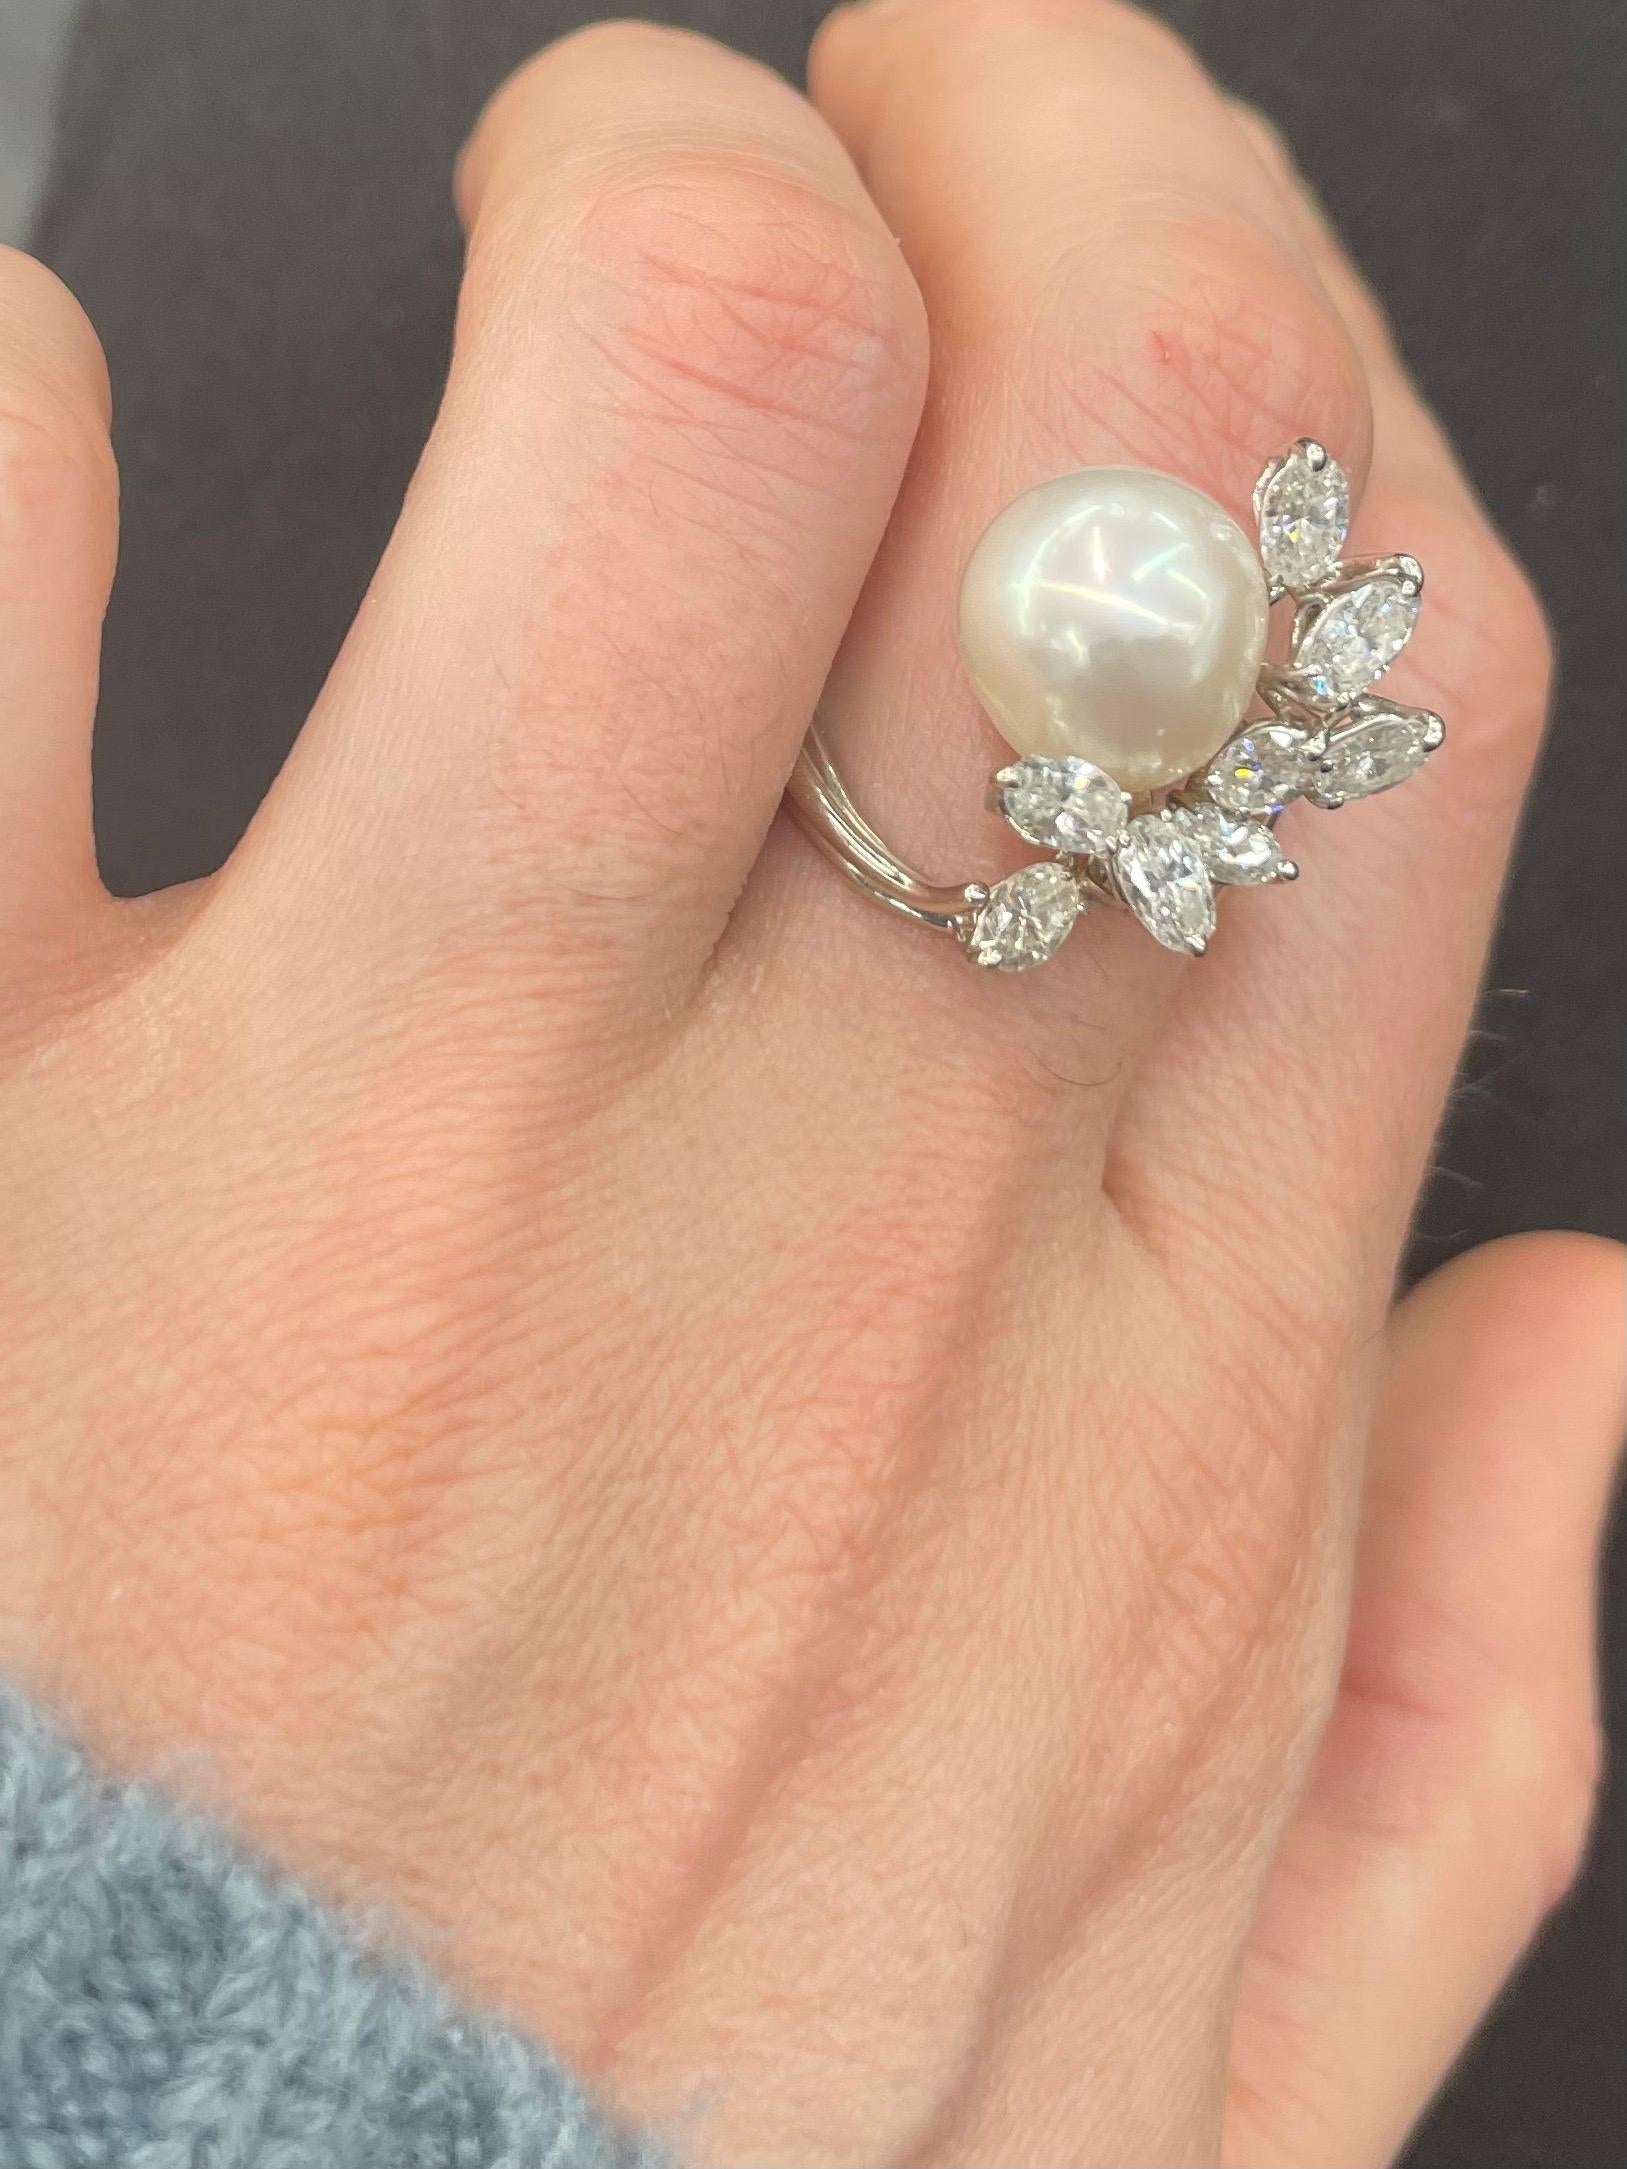 Australian South Sea Pearl Diamond Cluster Cocktail Ring 2 Carats 14K White Gold 8